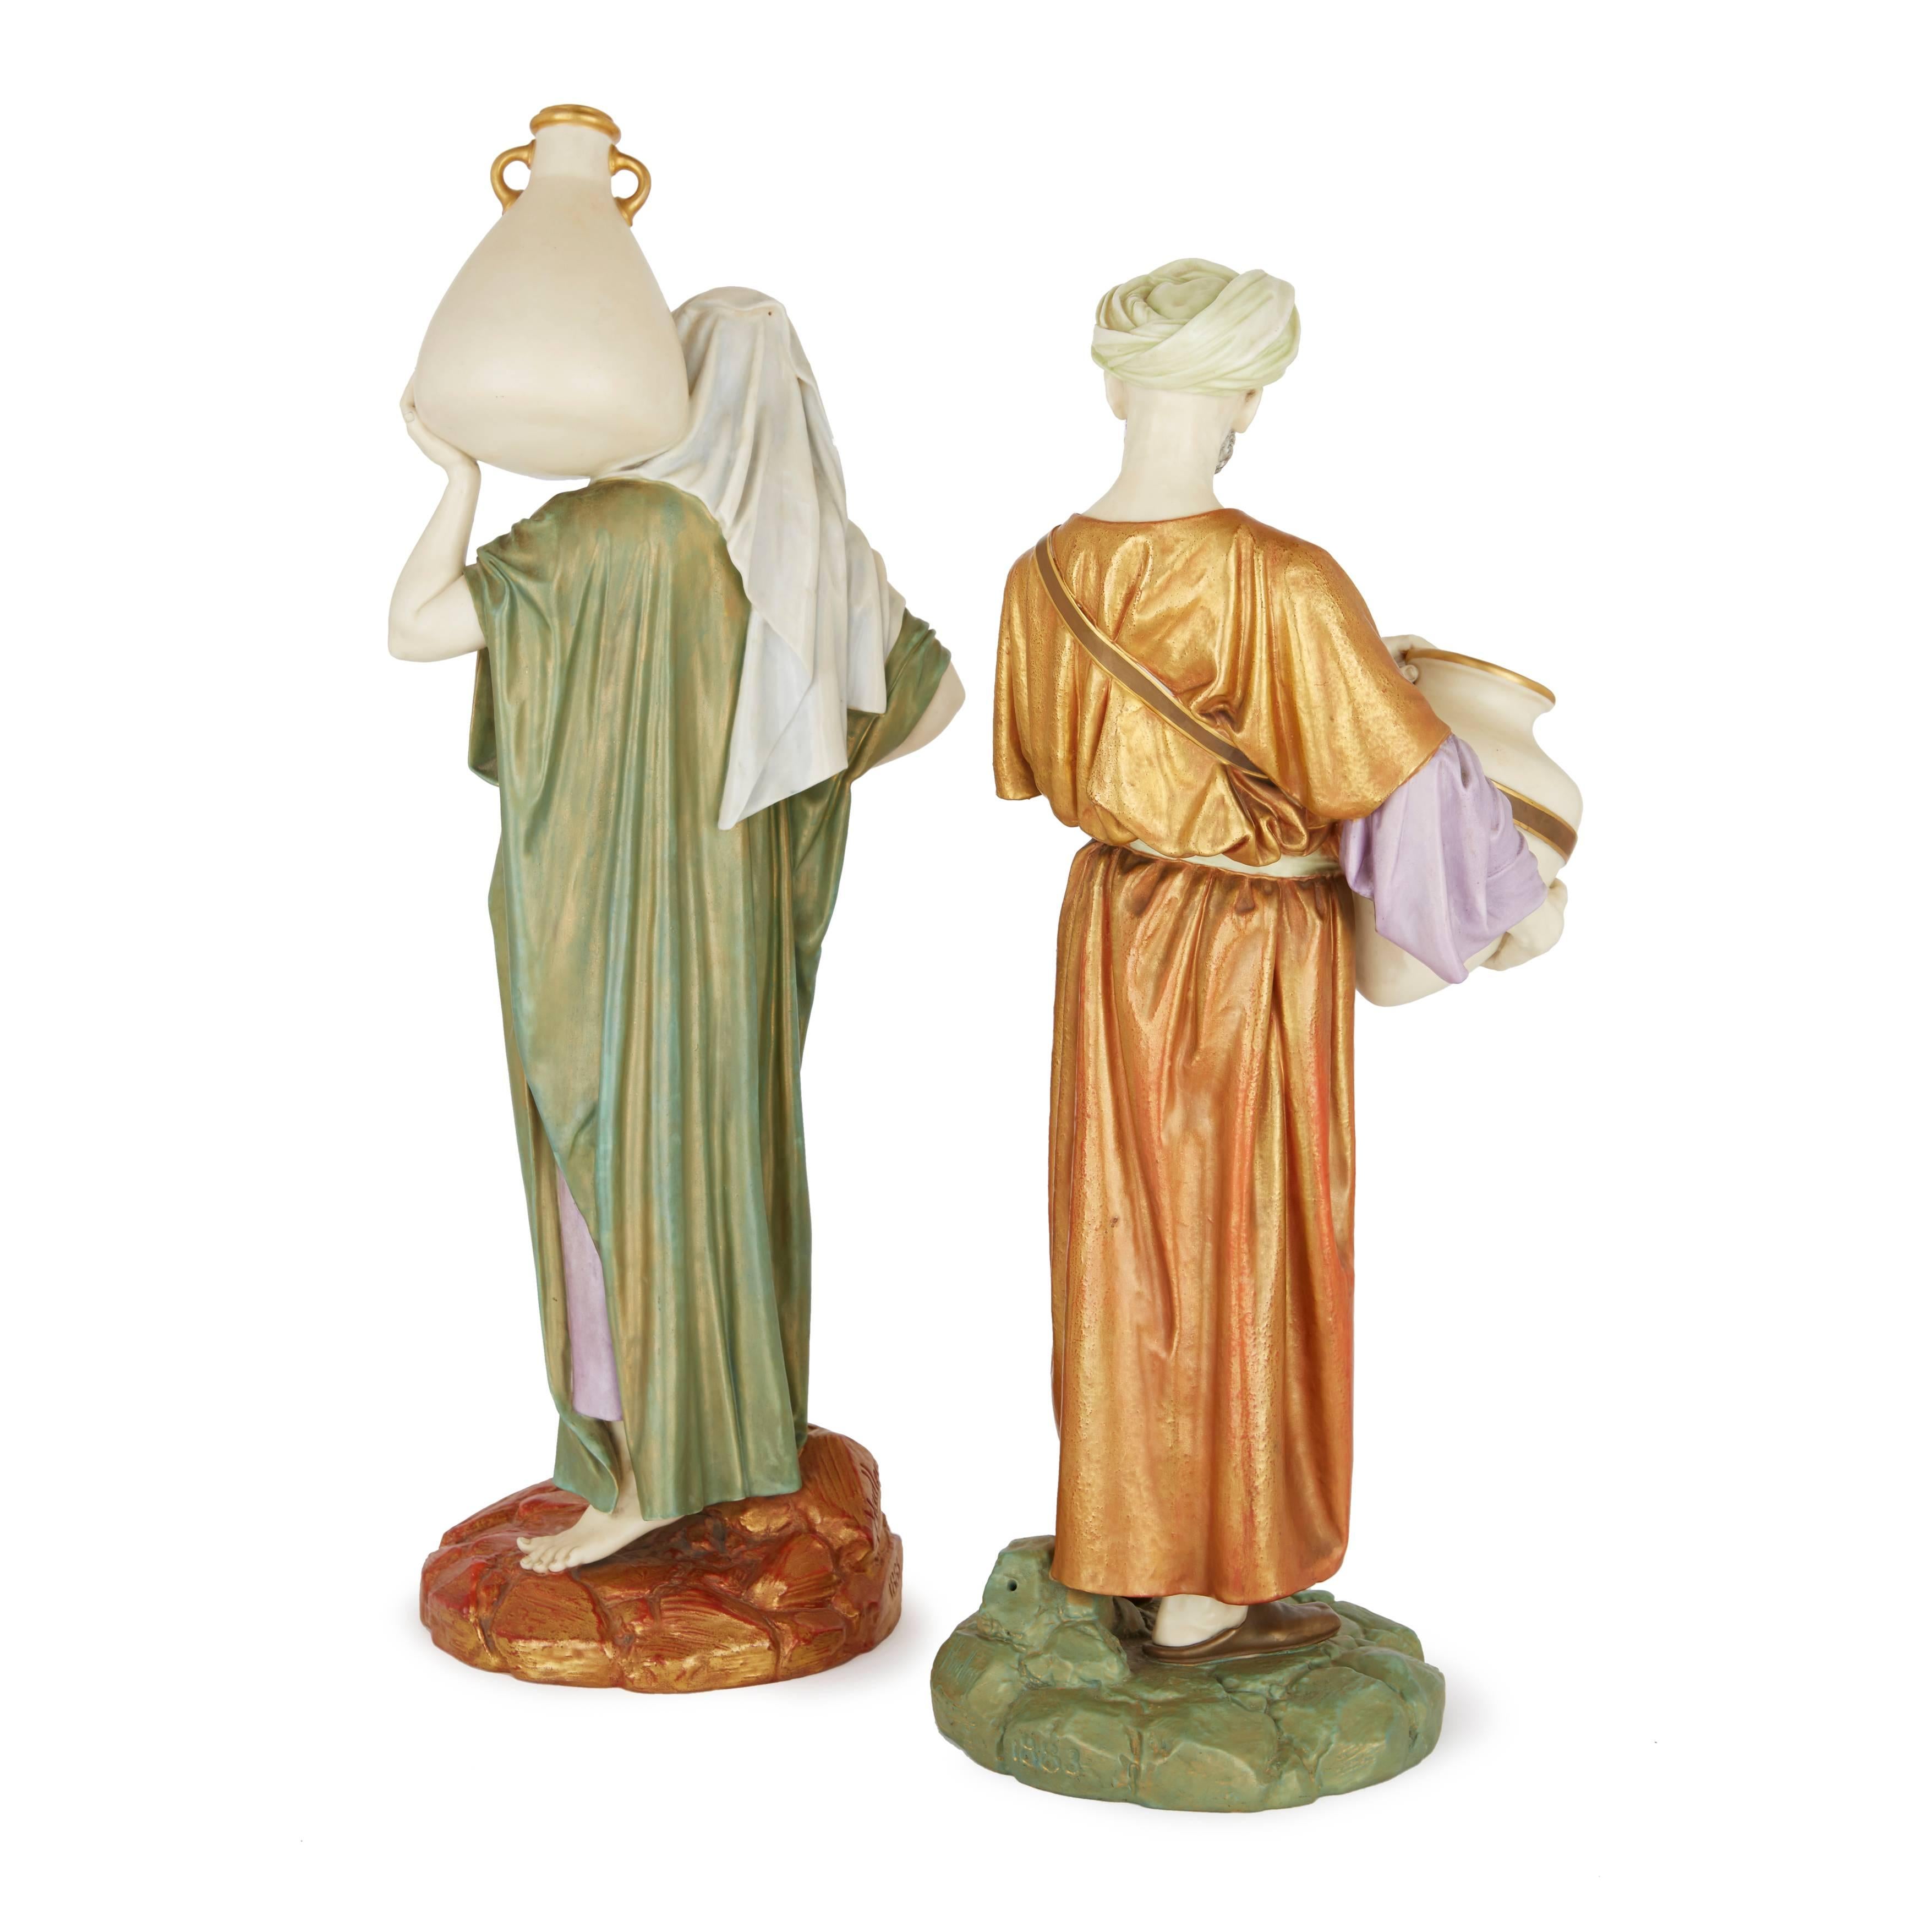 These two refined Orientalist figures represent a male and female in Eastern dress, each holding a ceramic water jug. The pair was modelled by British ceramic designer James Hadley, who was the principal modeller at the Royal Worcester porcelain